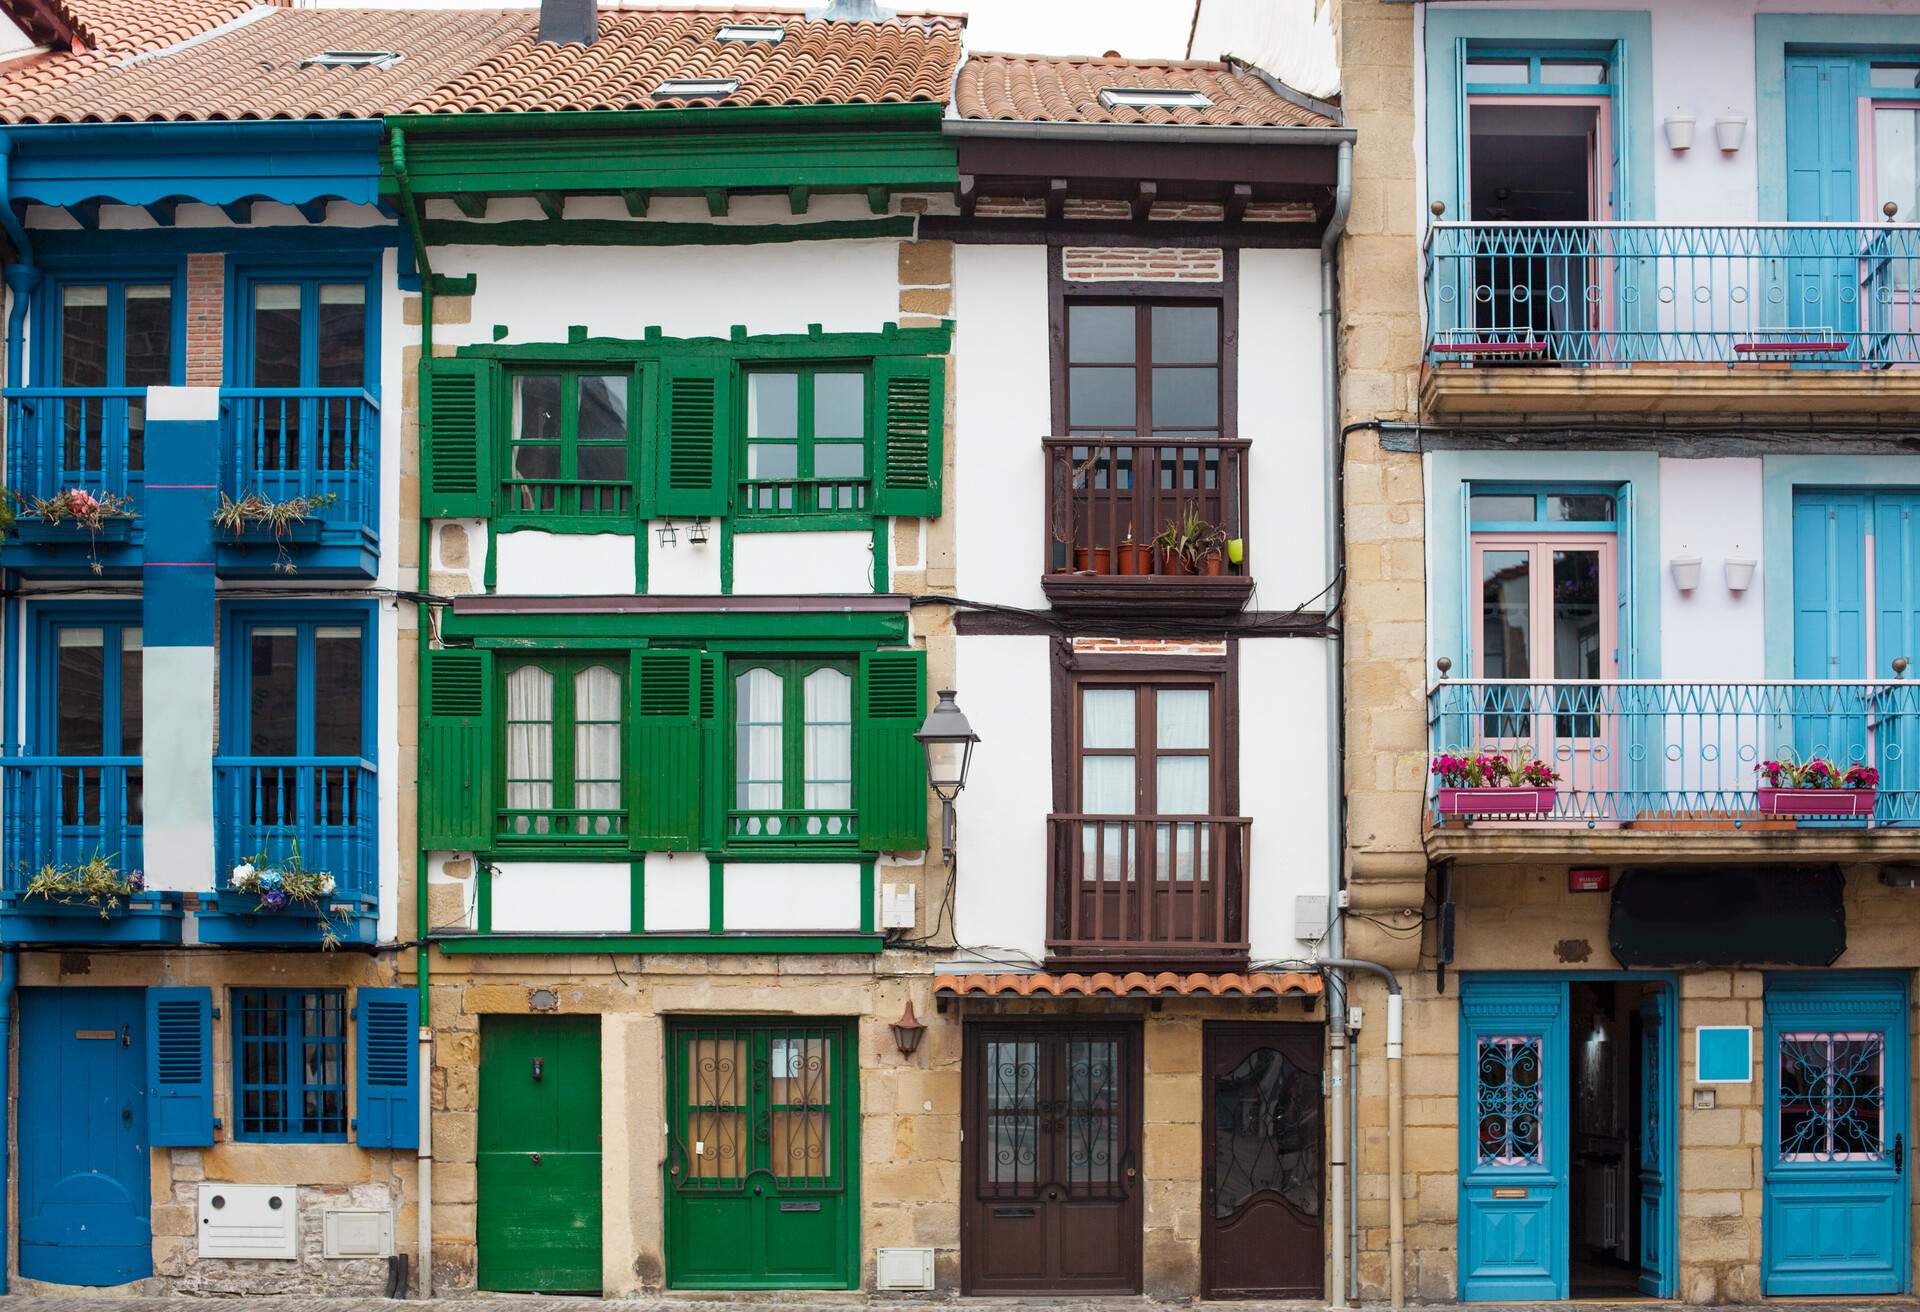 Typical houses in the municipality of Hondarribia .Typical houses in the municipality of Hondarribia in the Basque Country, Spain, is very close to San Sebastian and makes a natural border to Hendaye, France